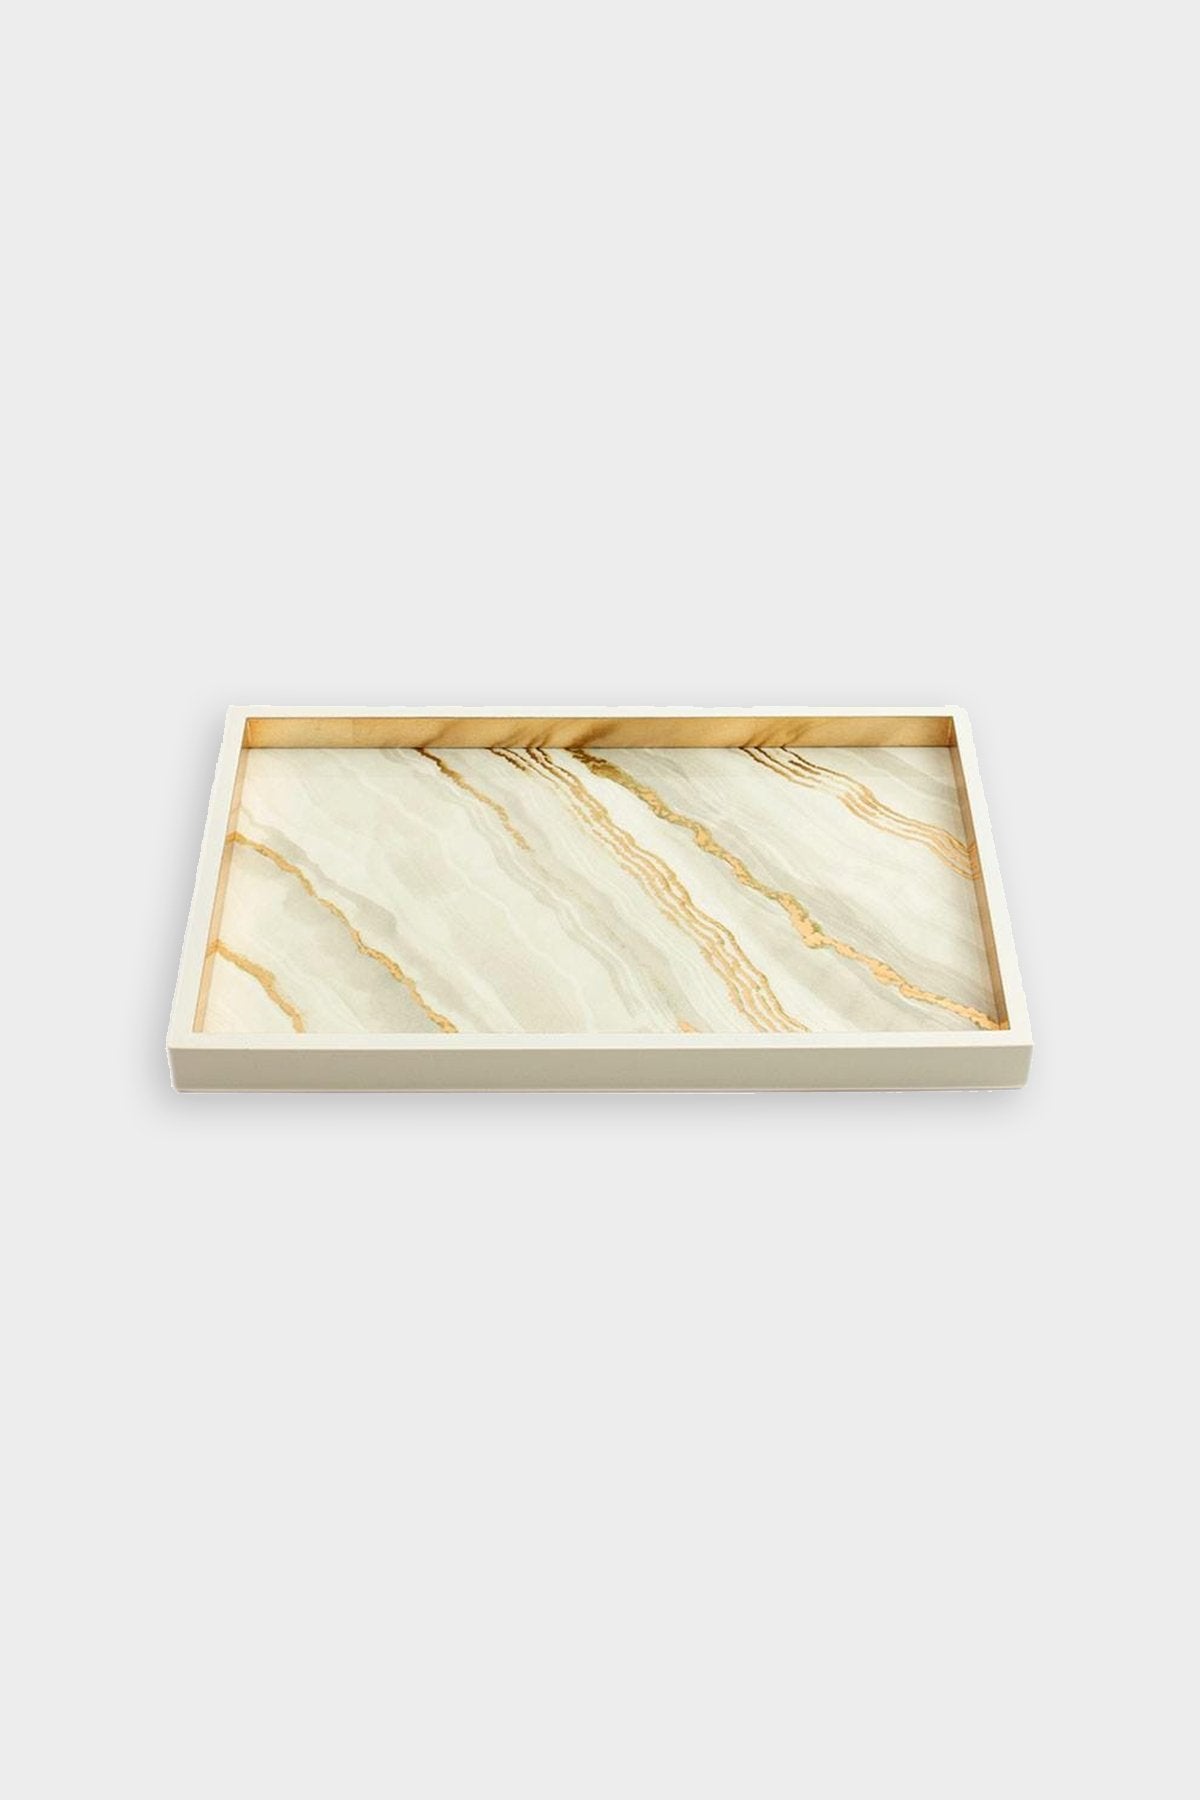 Marble Lacquer Vanity Tray in Moonlight Grey - shop-olivia.com